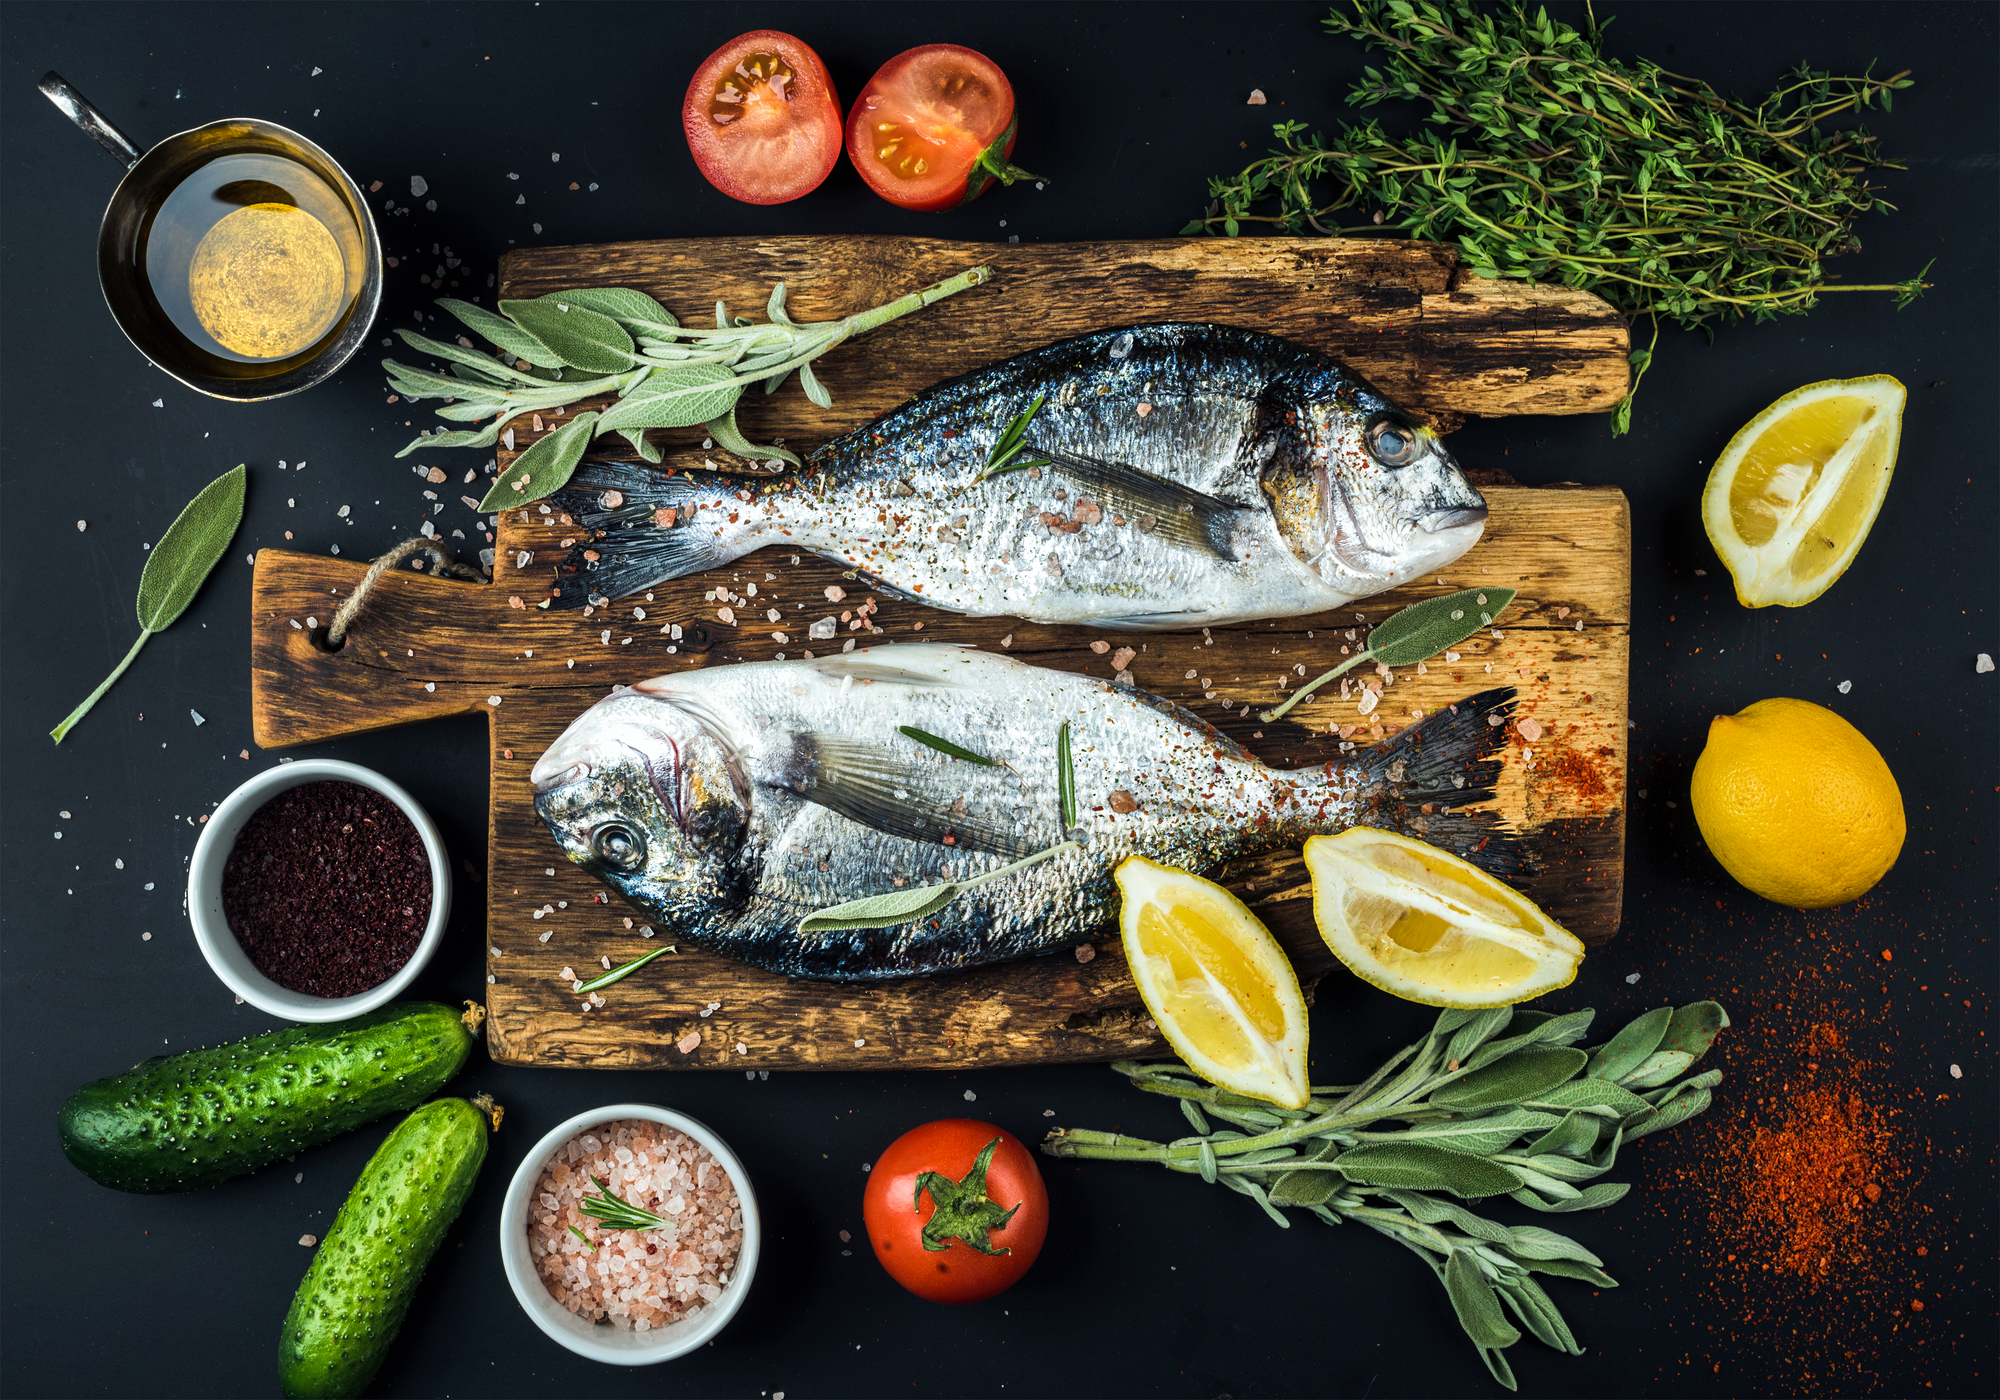 Fresh uncooked dorado or sea bream fish with lemon, herbs, oil, vegetables and spices on rustic wooden board over black backdrop